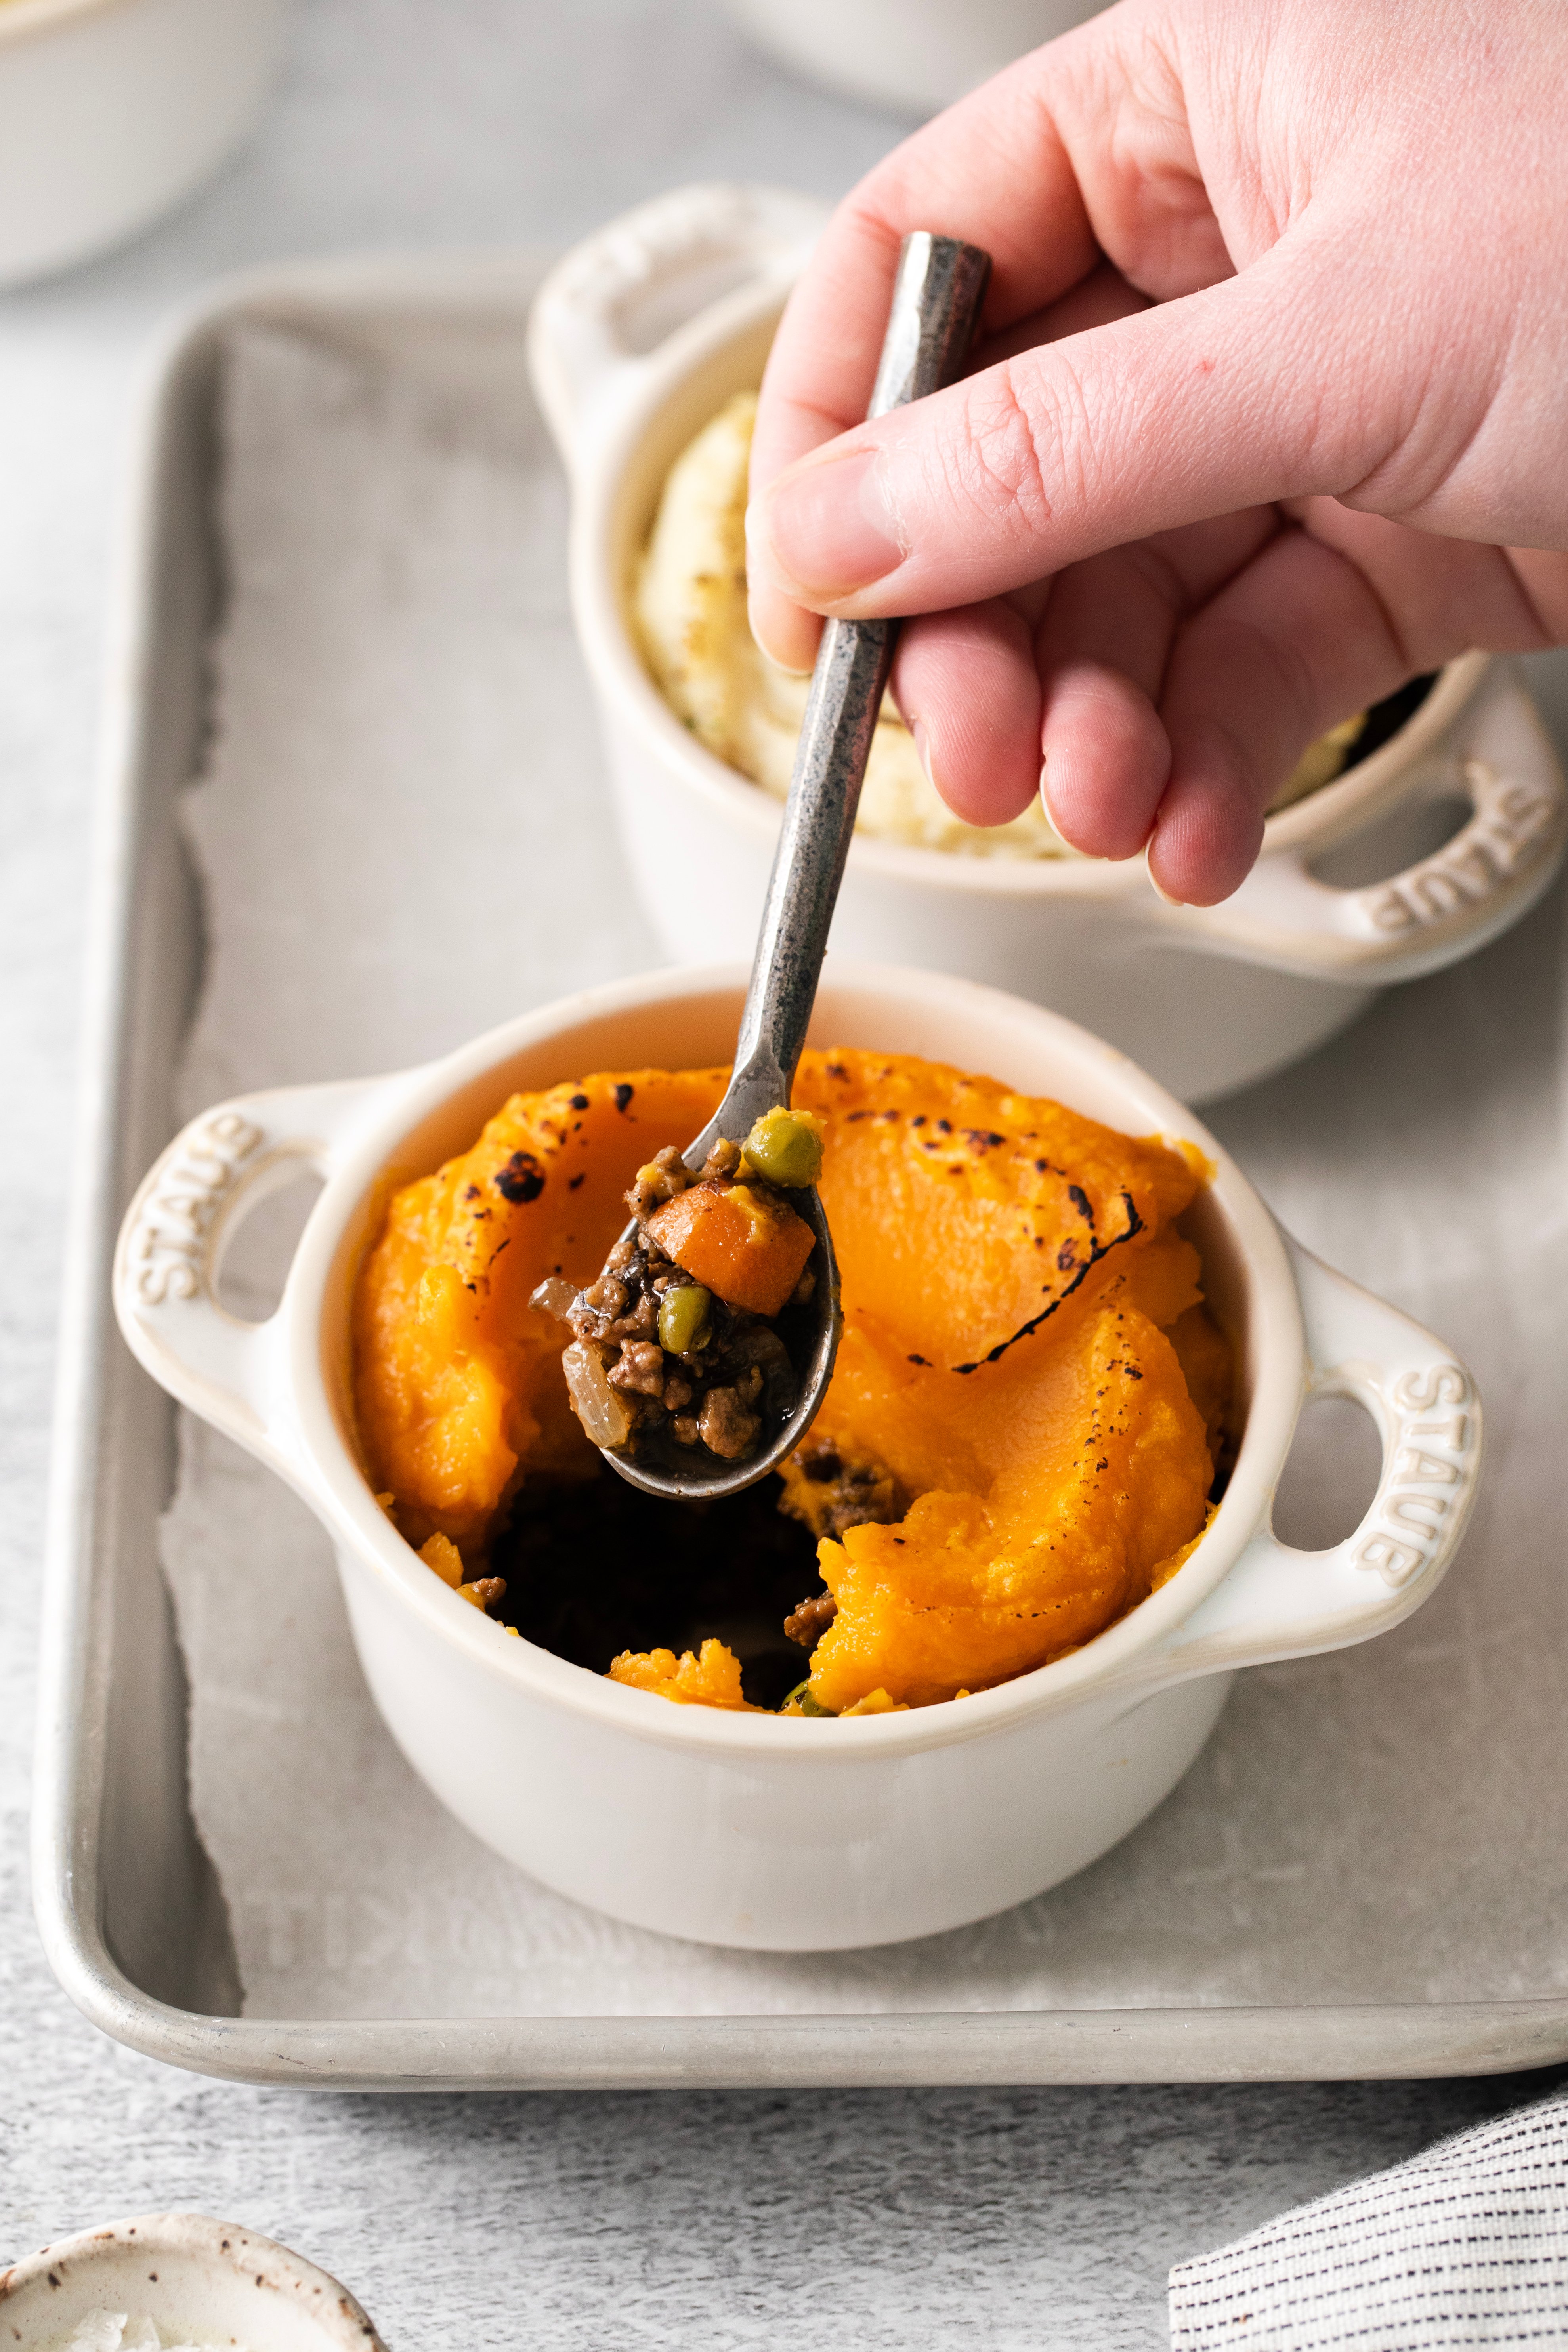 a spoon being plunged into a dish filled with sweet potato shepherd's pie.